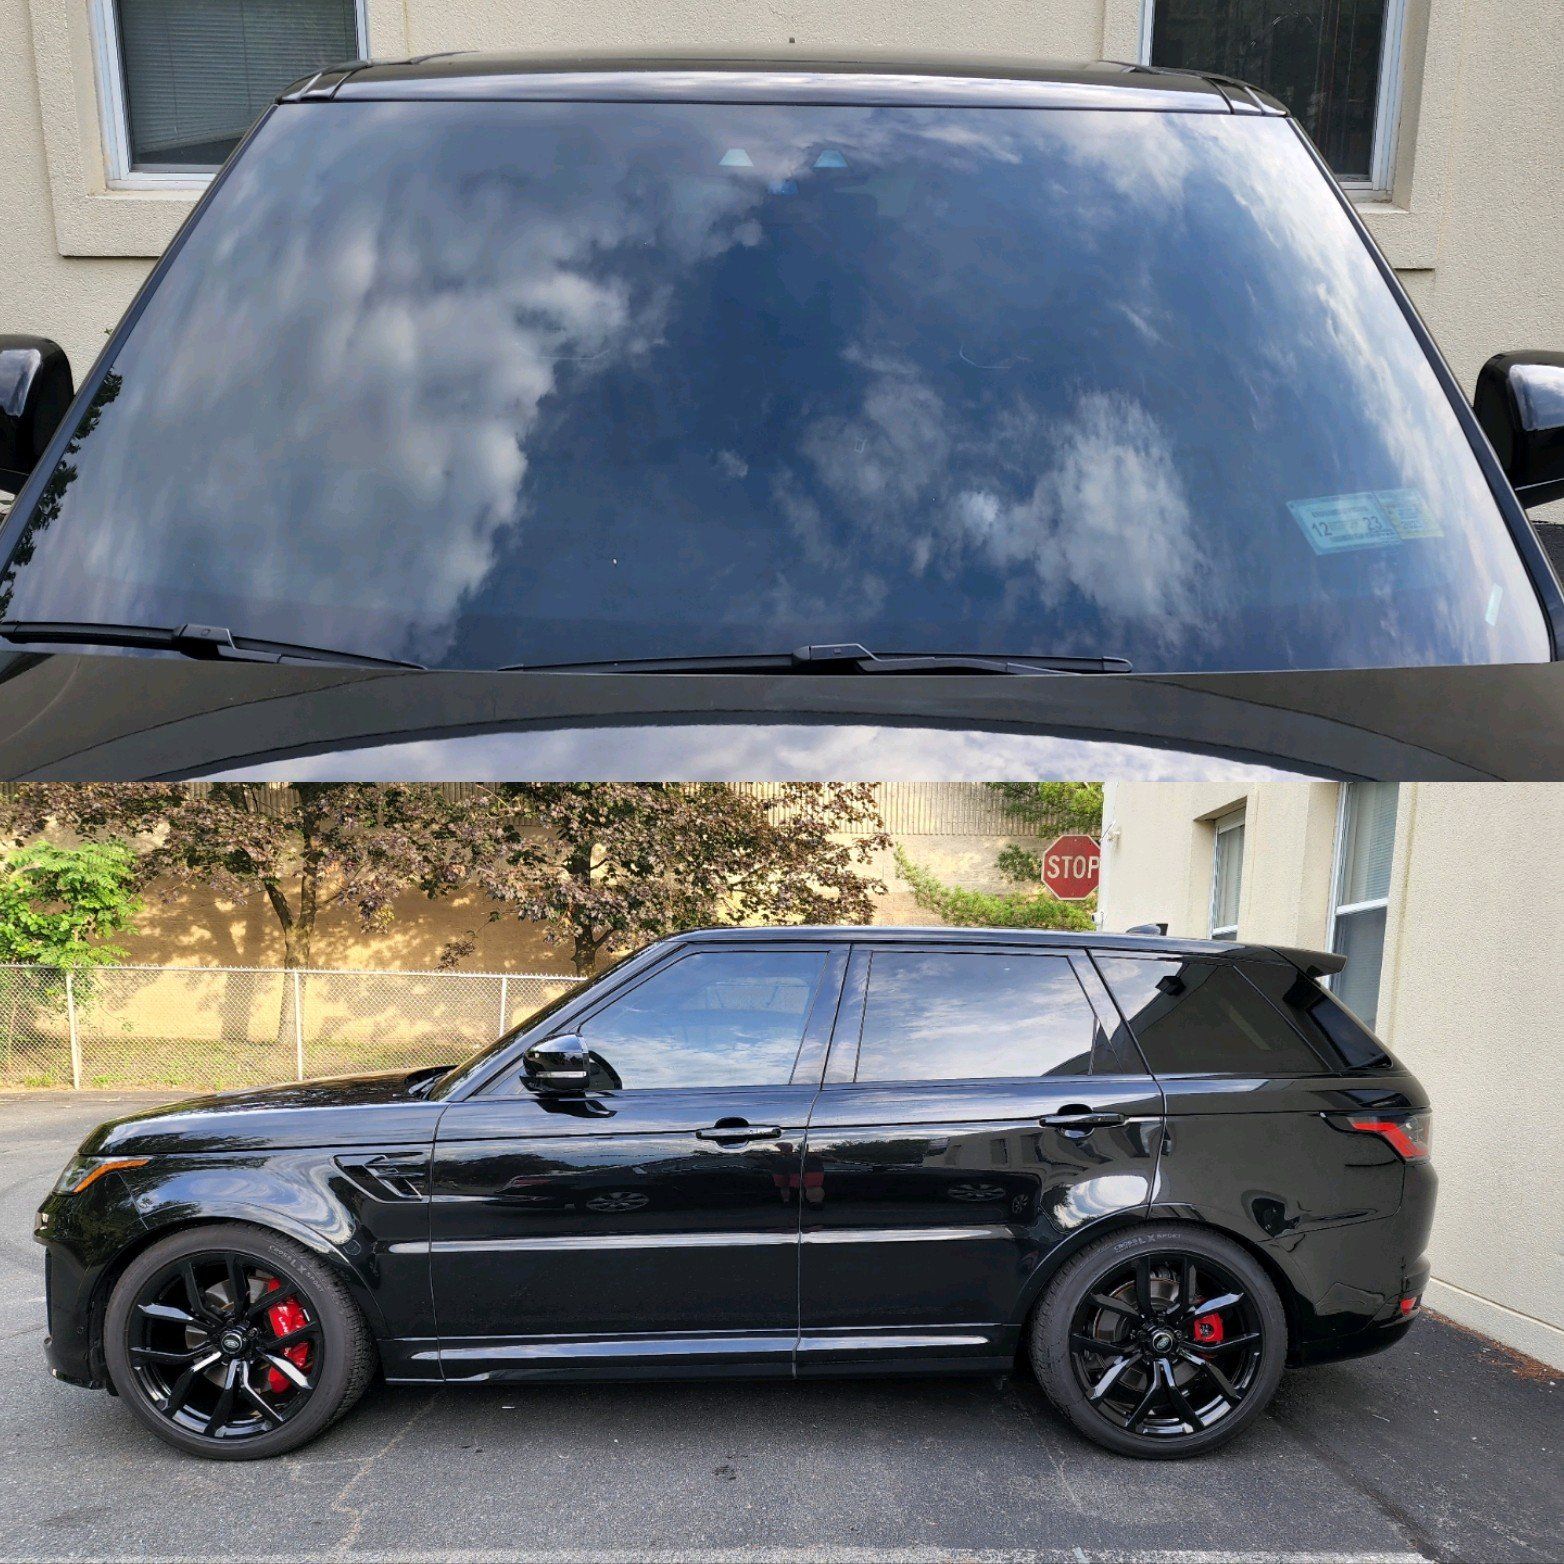 A black range rover sport is parked in front of a building.